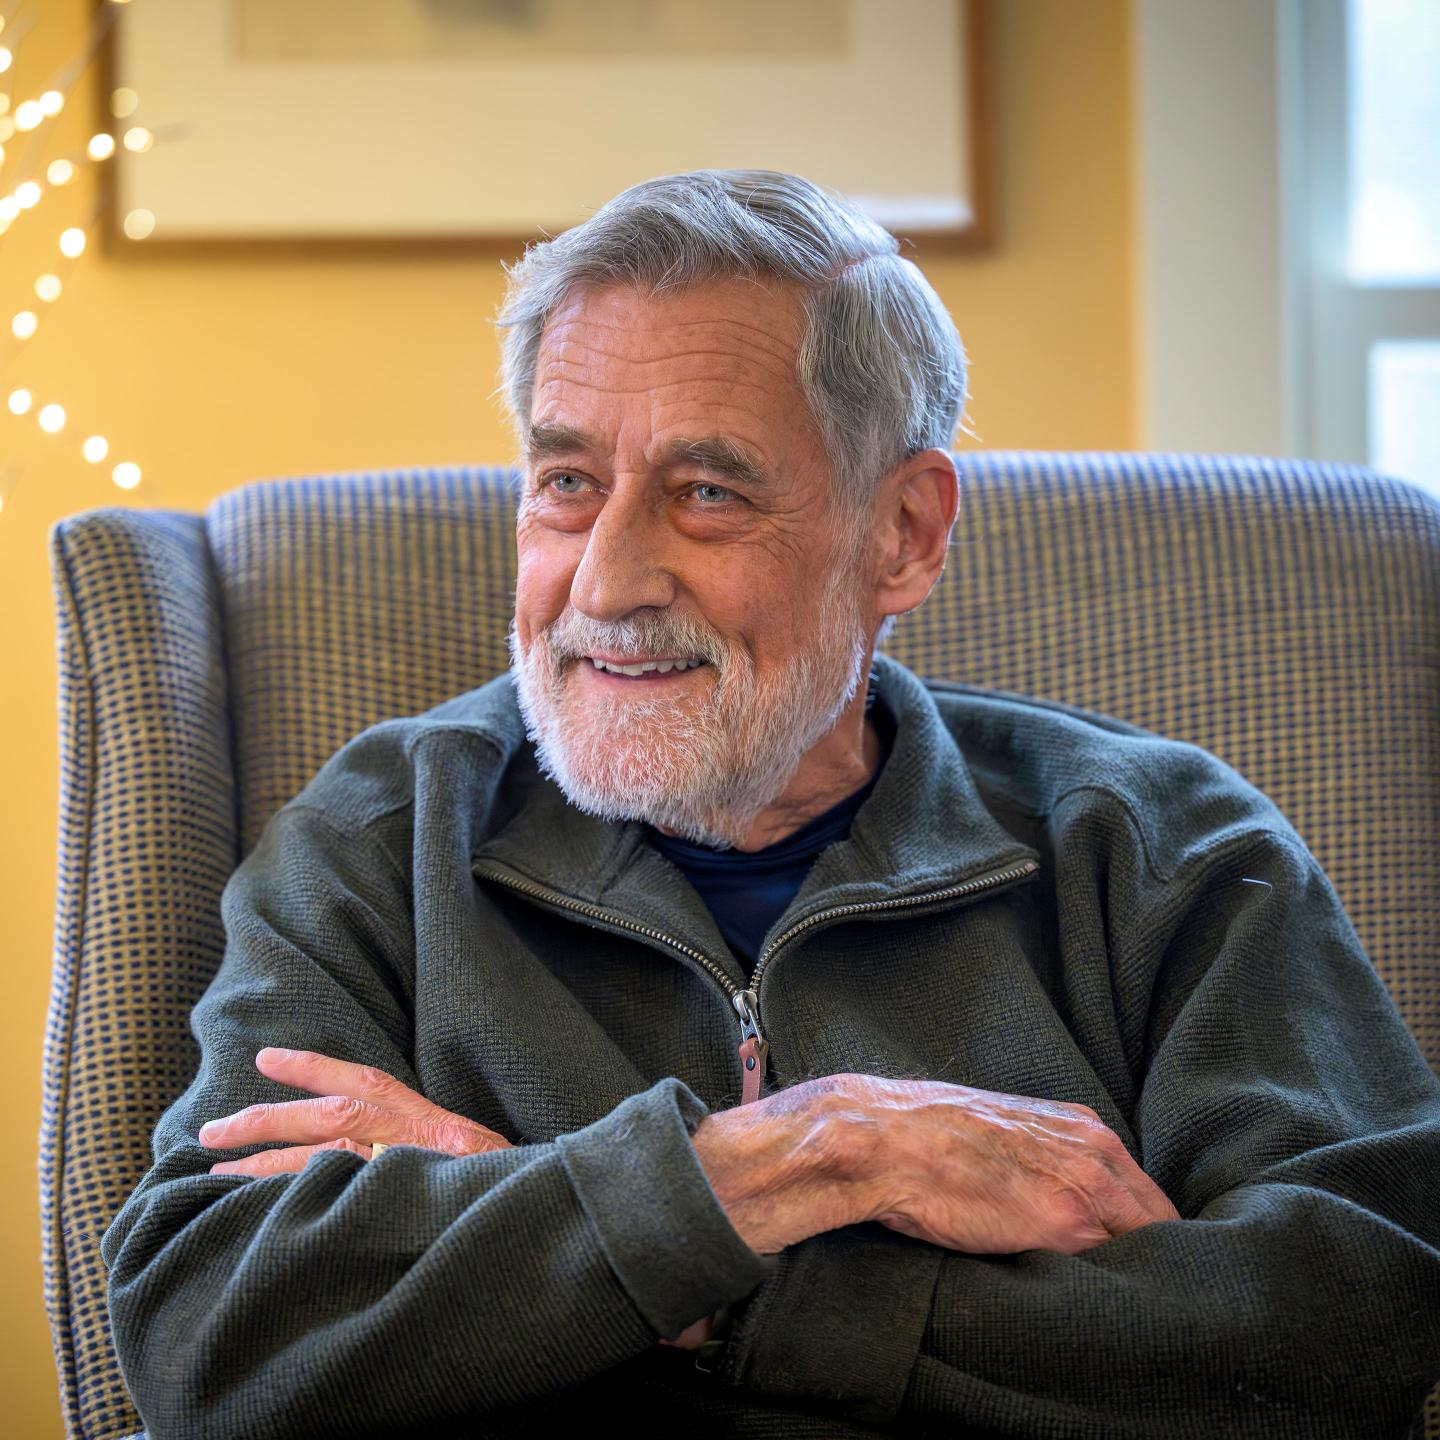 Maxwell King '62 during interview